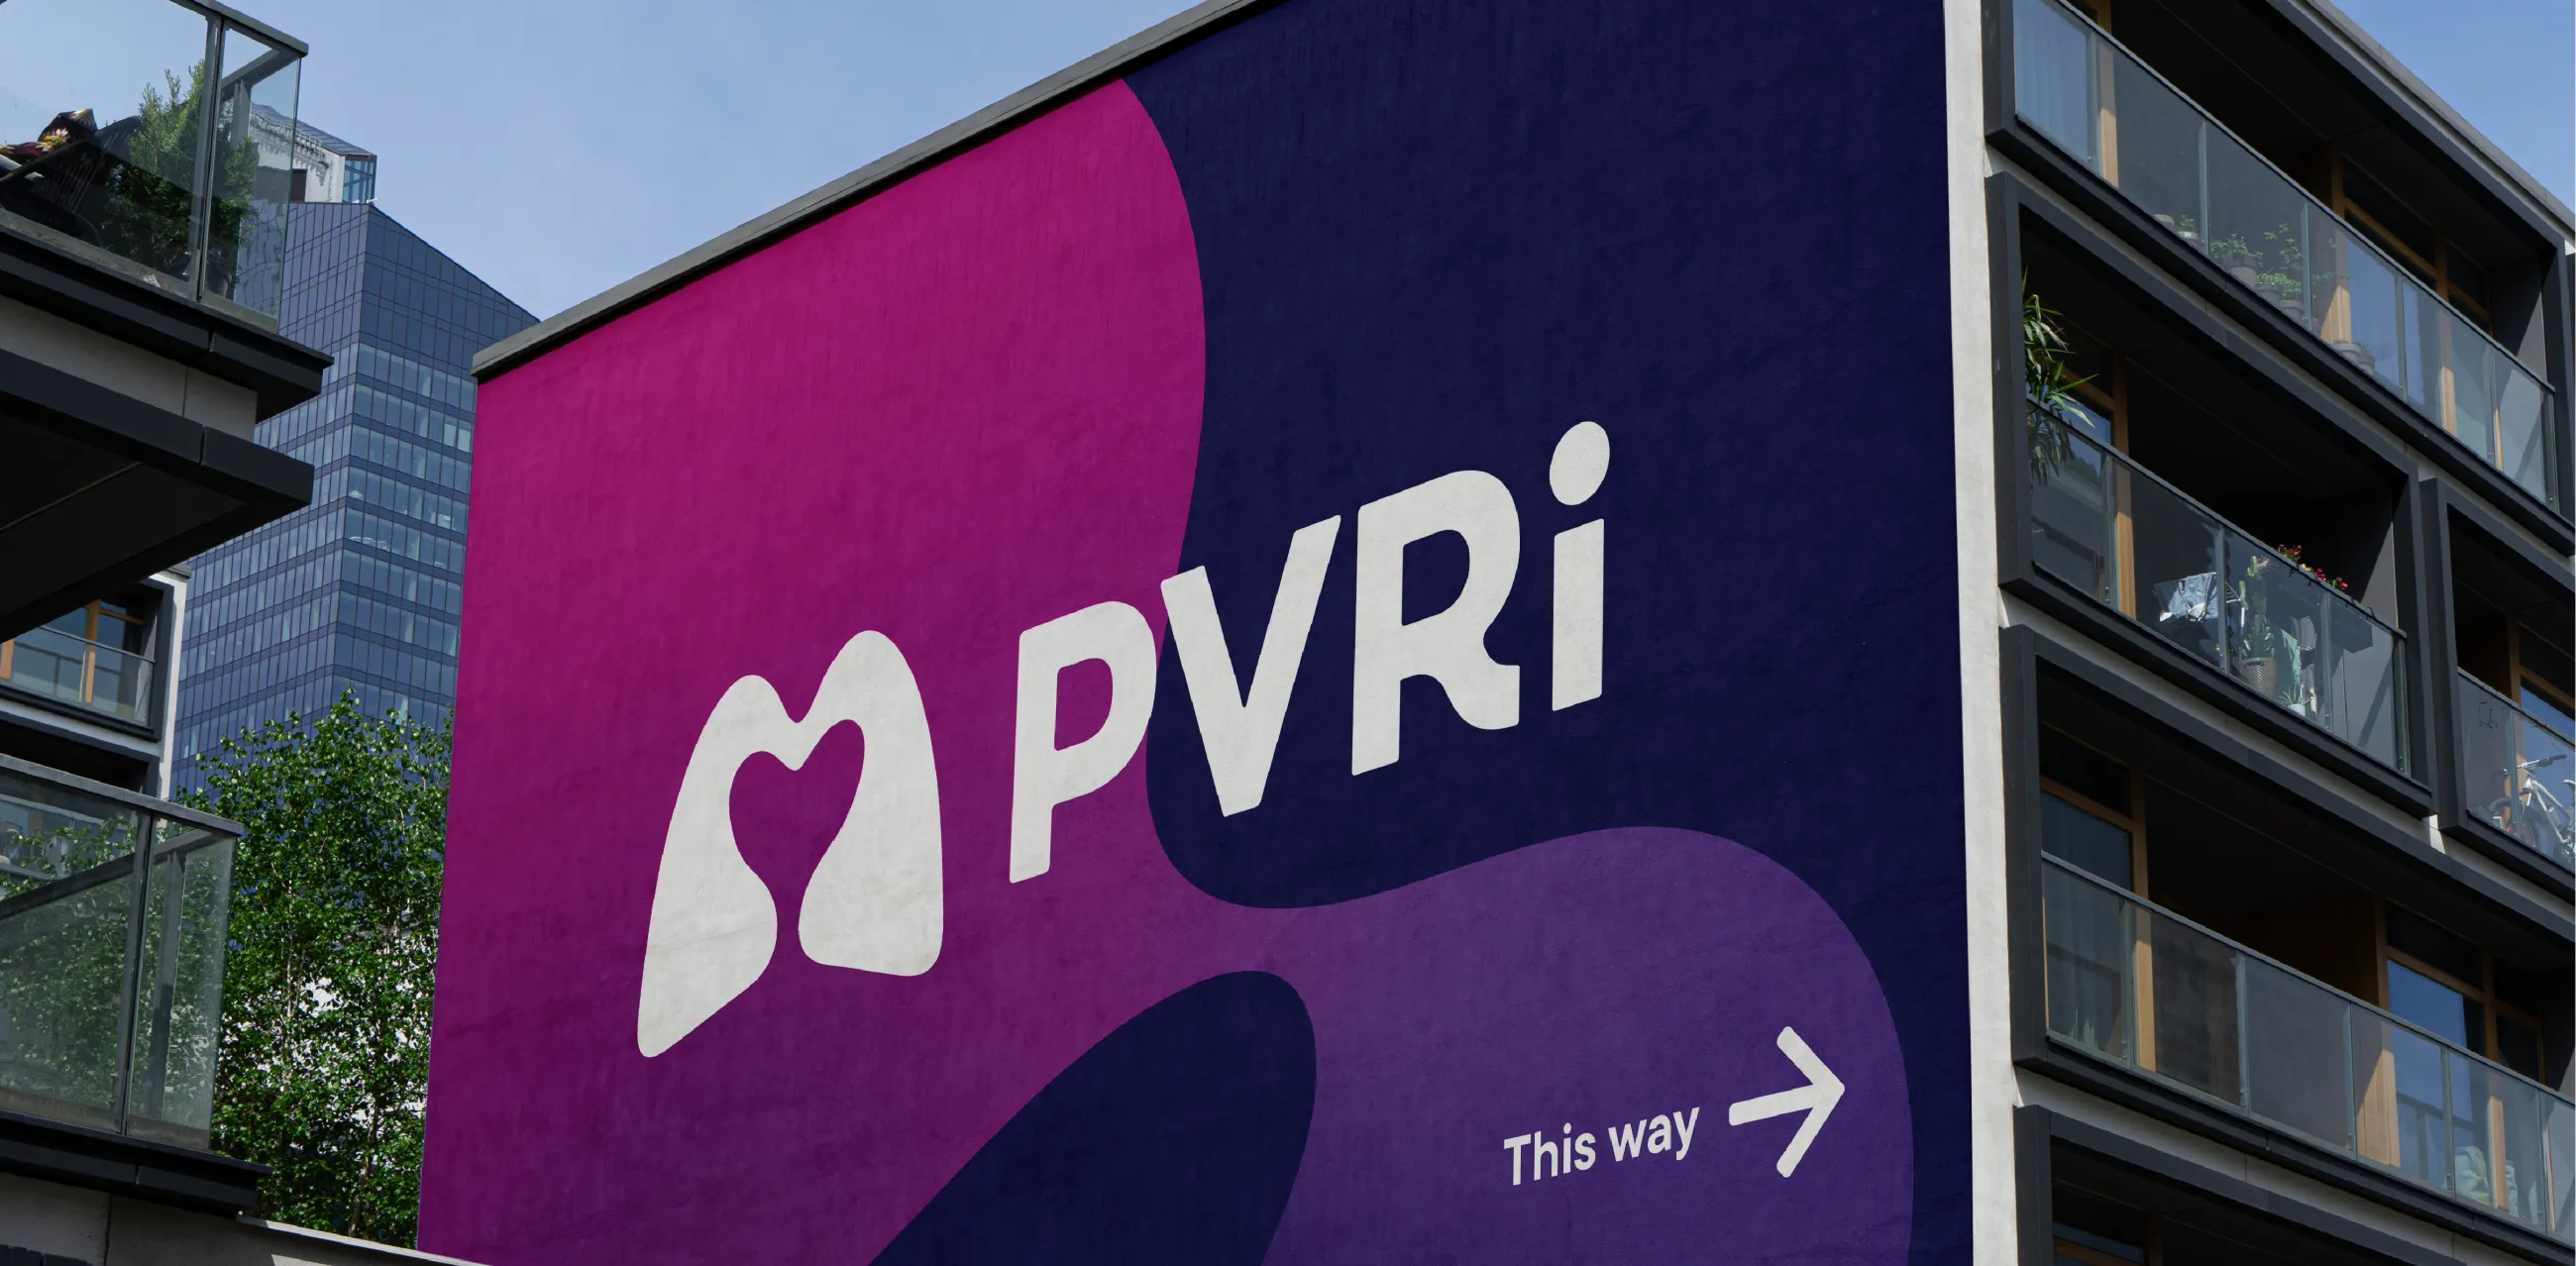 Huge PVRI signage on the side of a building. PVRI logo in white on a background of a signature fluid shape in shades of pink, plum, purple and indigo. With an arrow showing people the event is 'This way' 